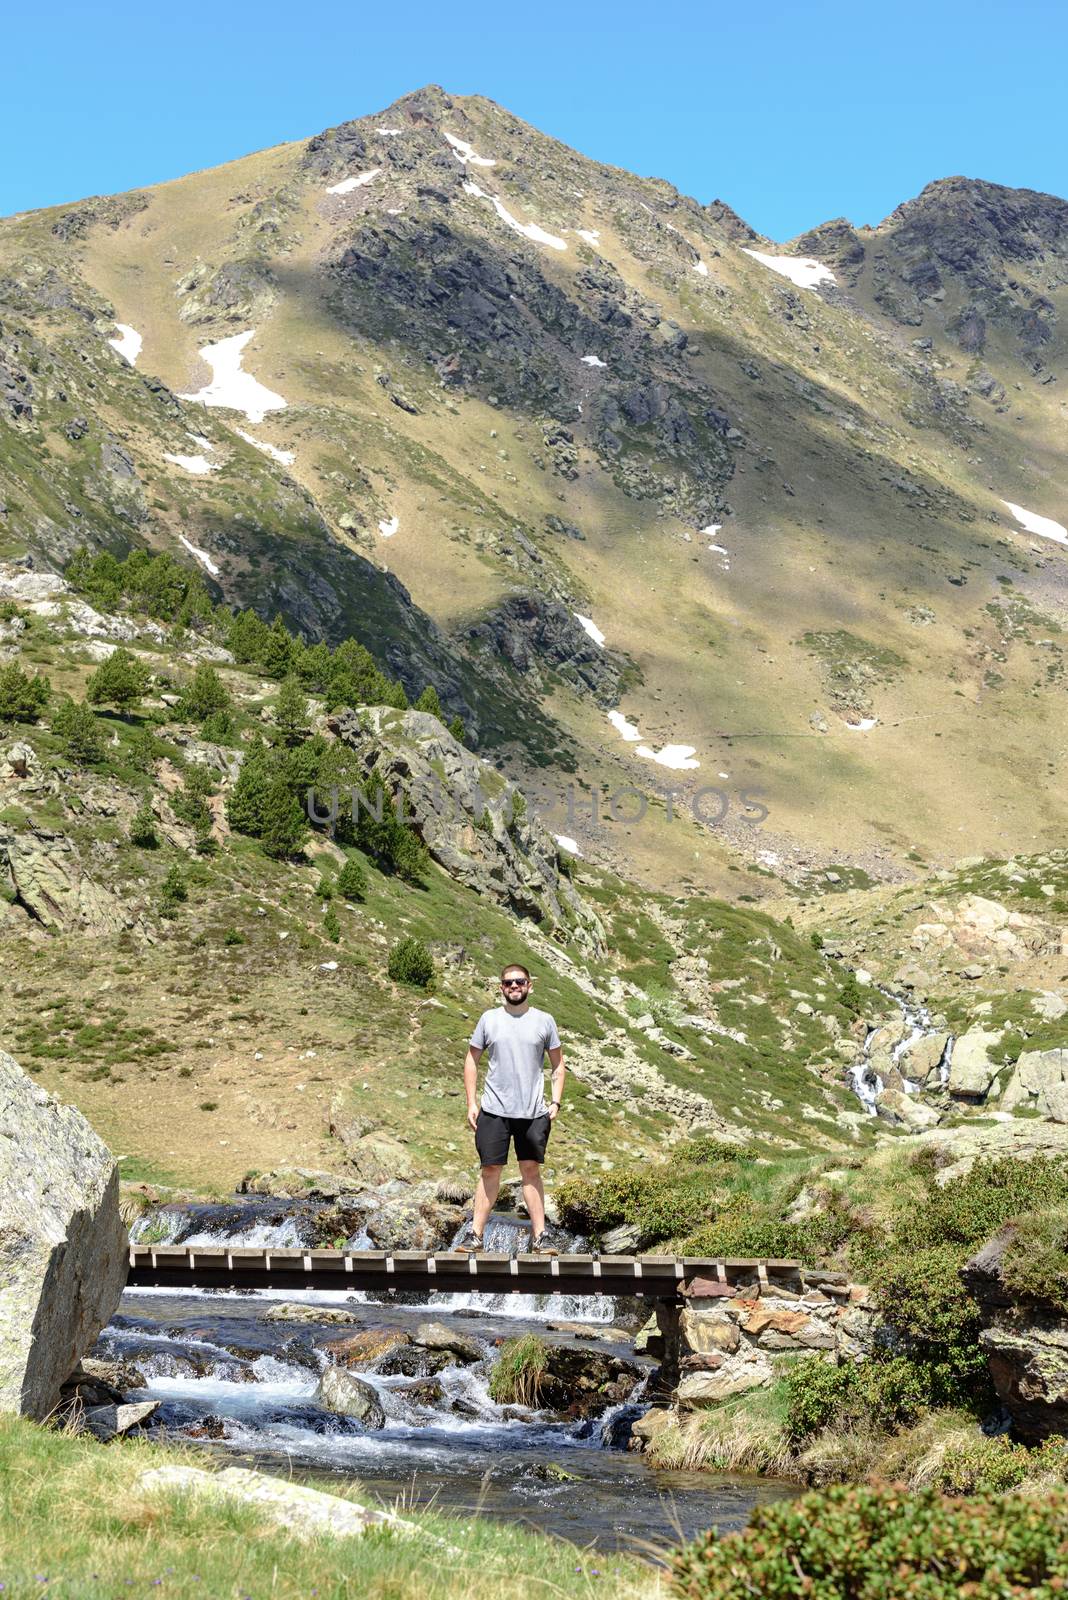 Ordino, Andorra : 2020 may 29 : Young men in the Beautiful view hiking in the Andorra Pyrenees Mountains in Ordino, near the Lakes of Tristaina.